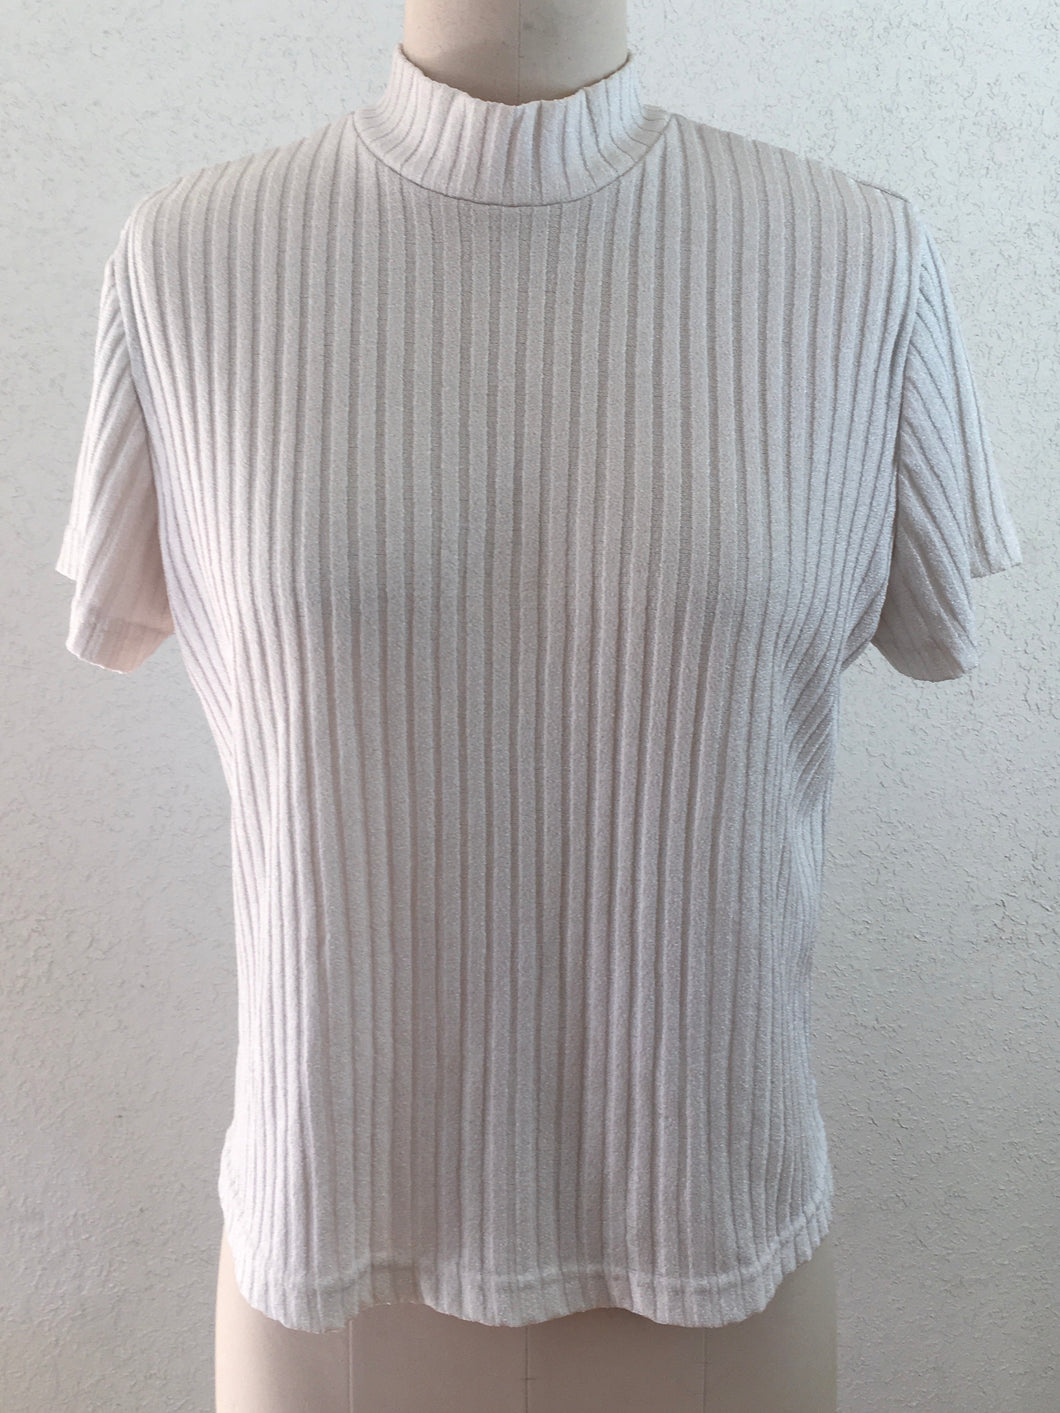 Off-White Mock Neck Ribbed Light Sweater Top